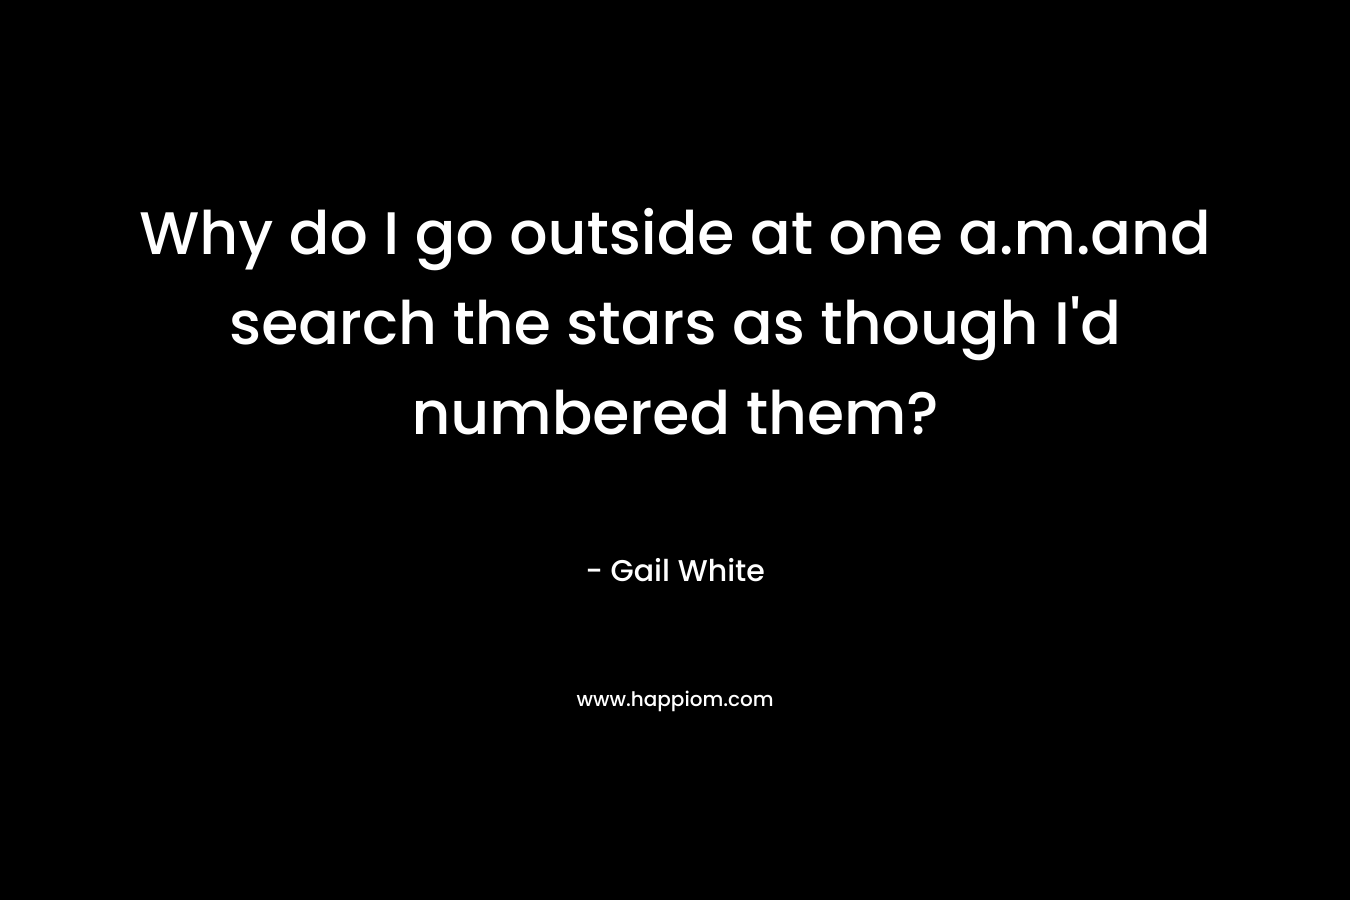 Why do I go outside at one a.m.and search the stars as though I'd numbered them?